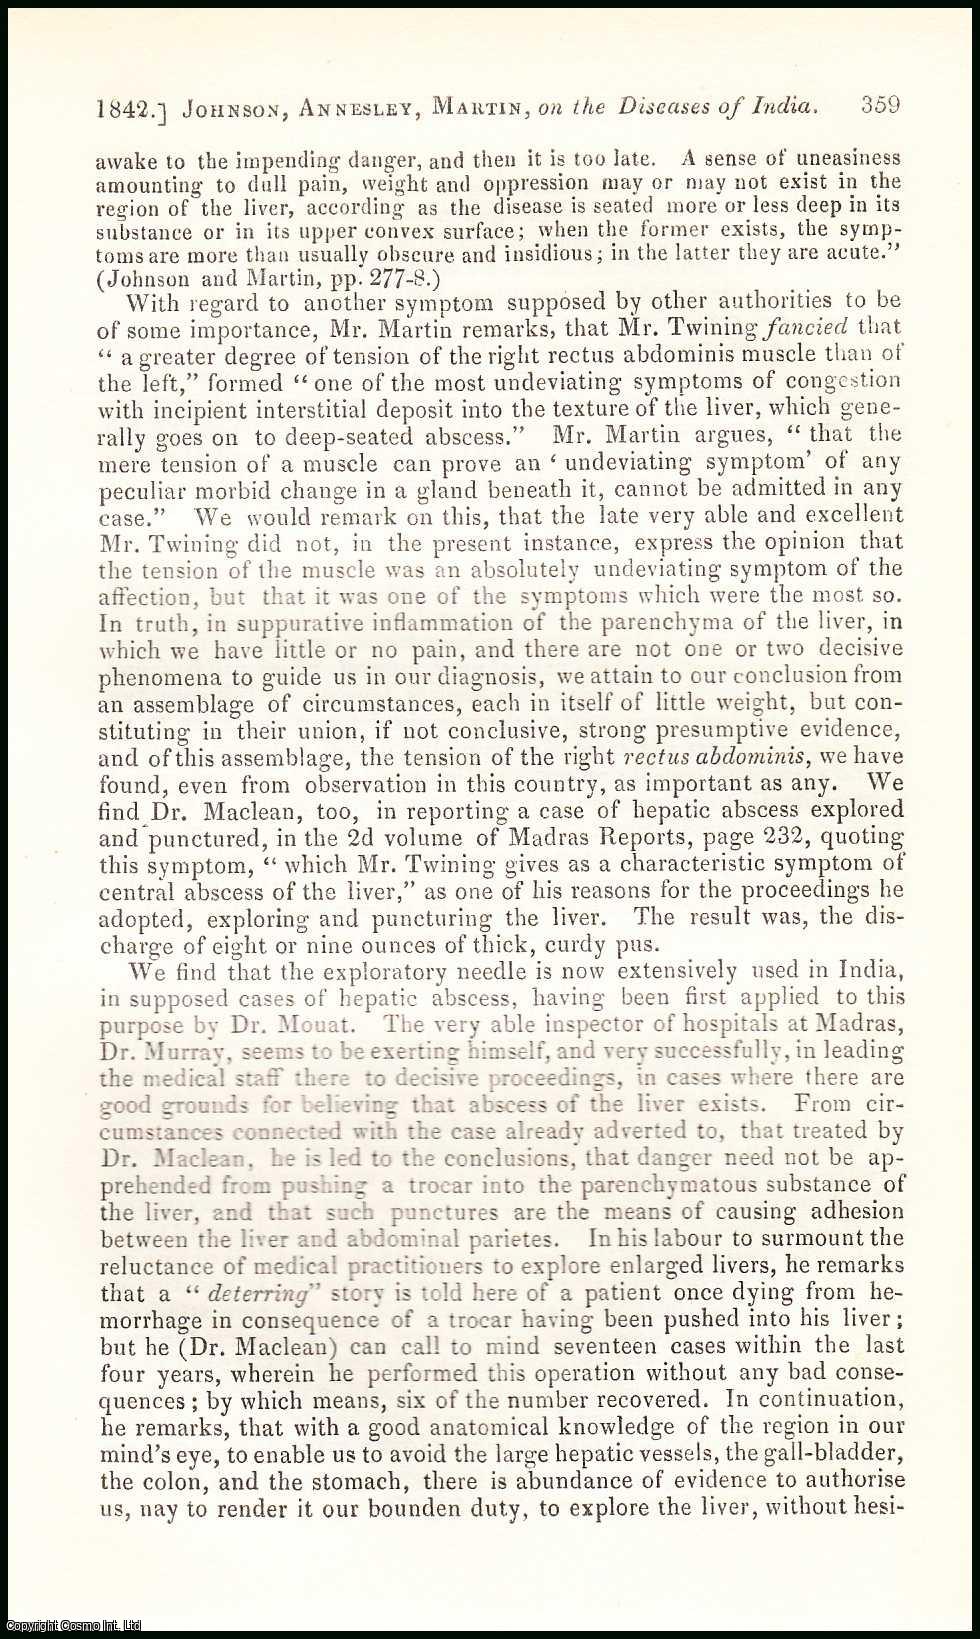 James Ranald Martin, Esq., late Presidency Surgeon, & Surgeon to the Native Hospital, Calcutta & others. - The Tropical Diseases of India. An uncommon original article from the British and Foreign Medical Review, 1842.